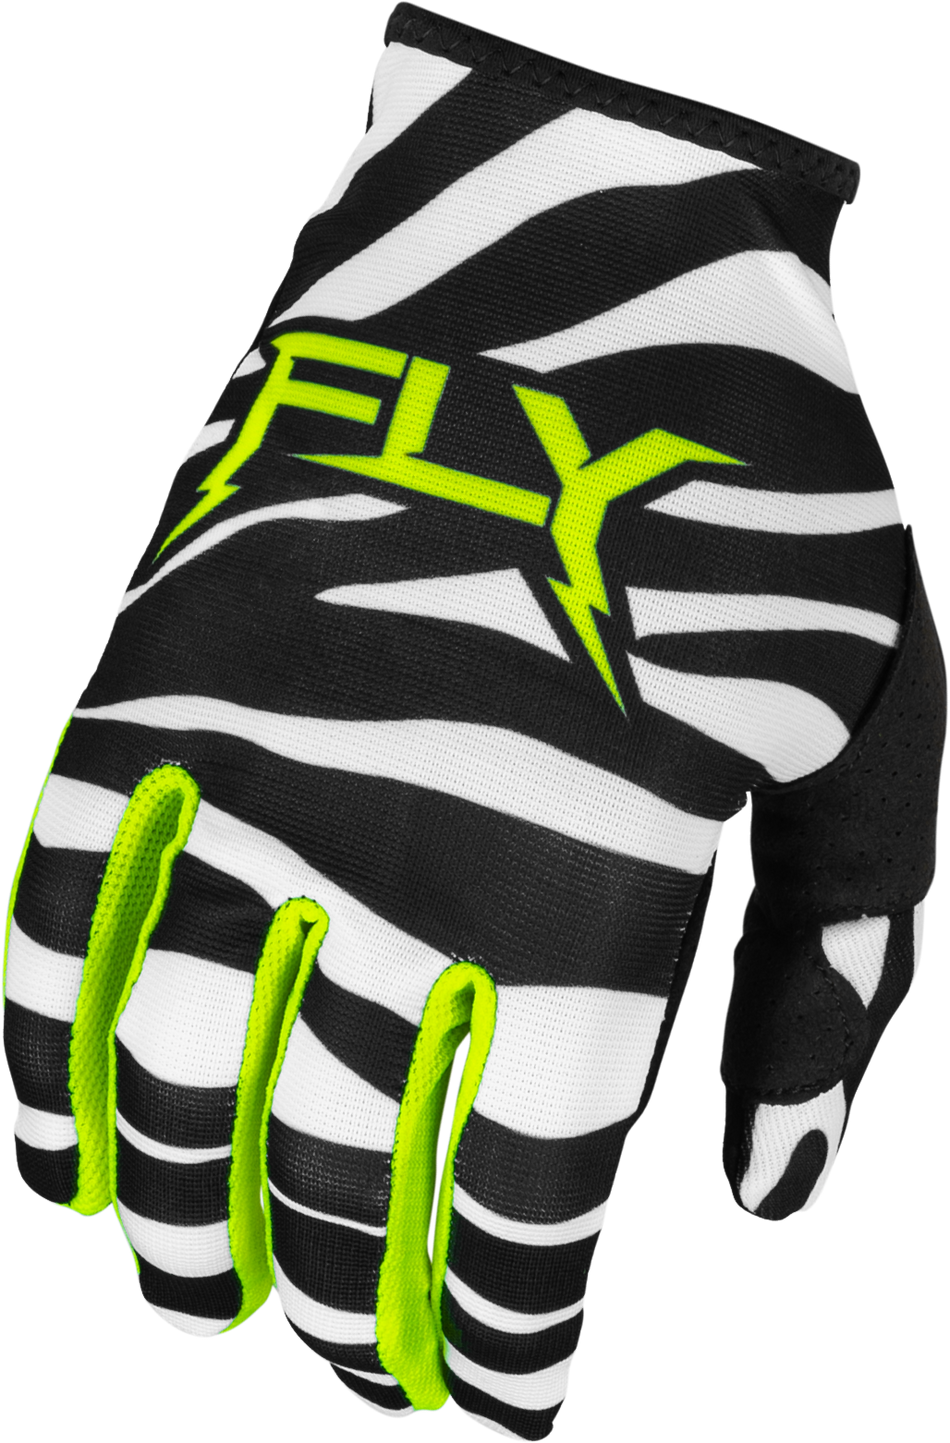 FLY RACING Lite Uncaged Gloves Black/White/Neon Green Xs 377-742XS